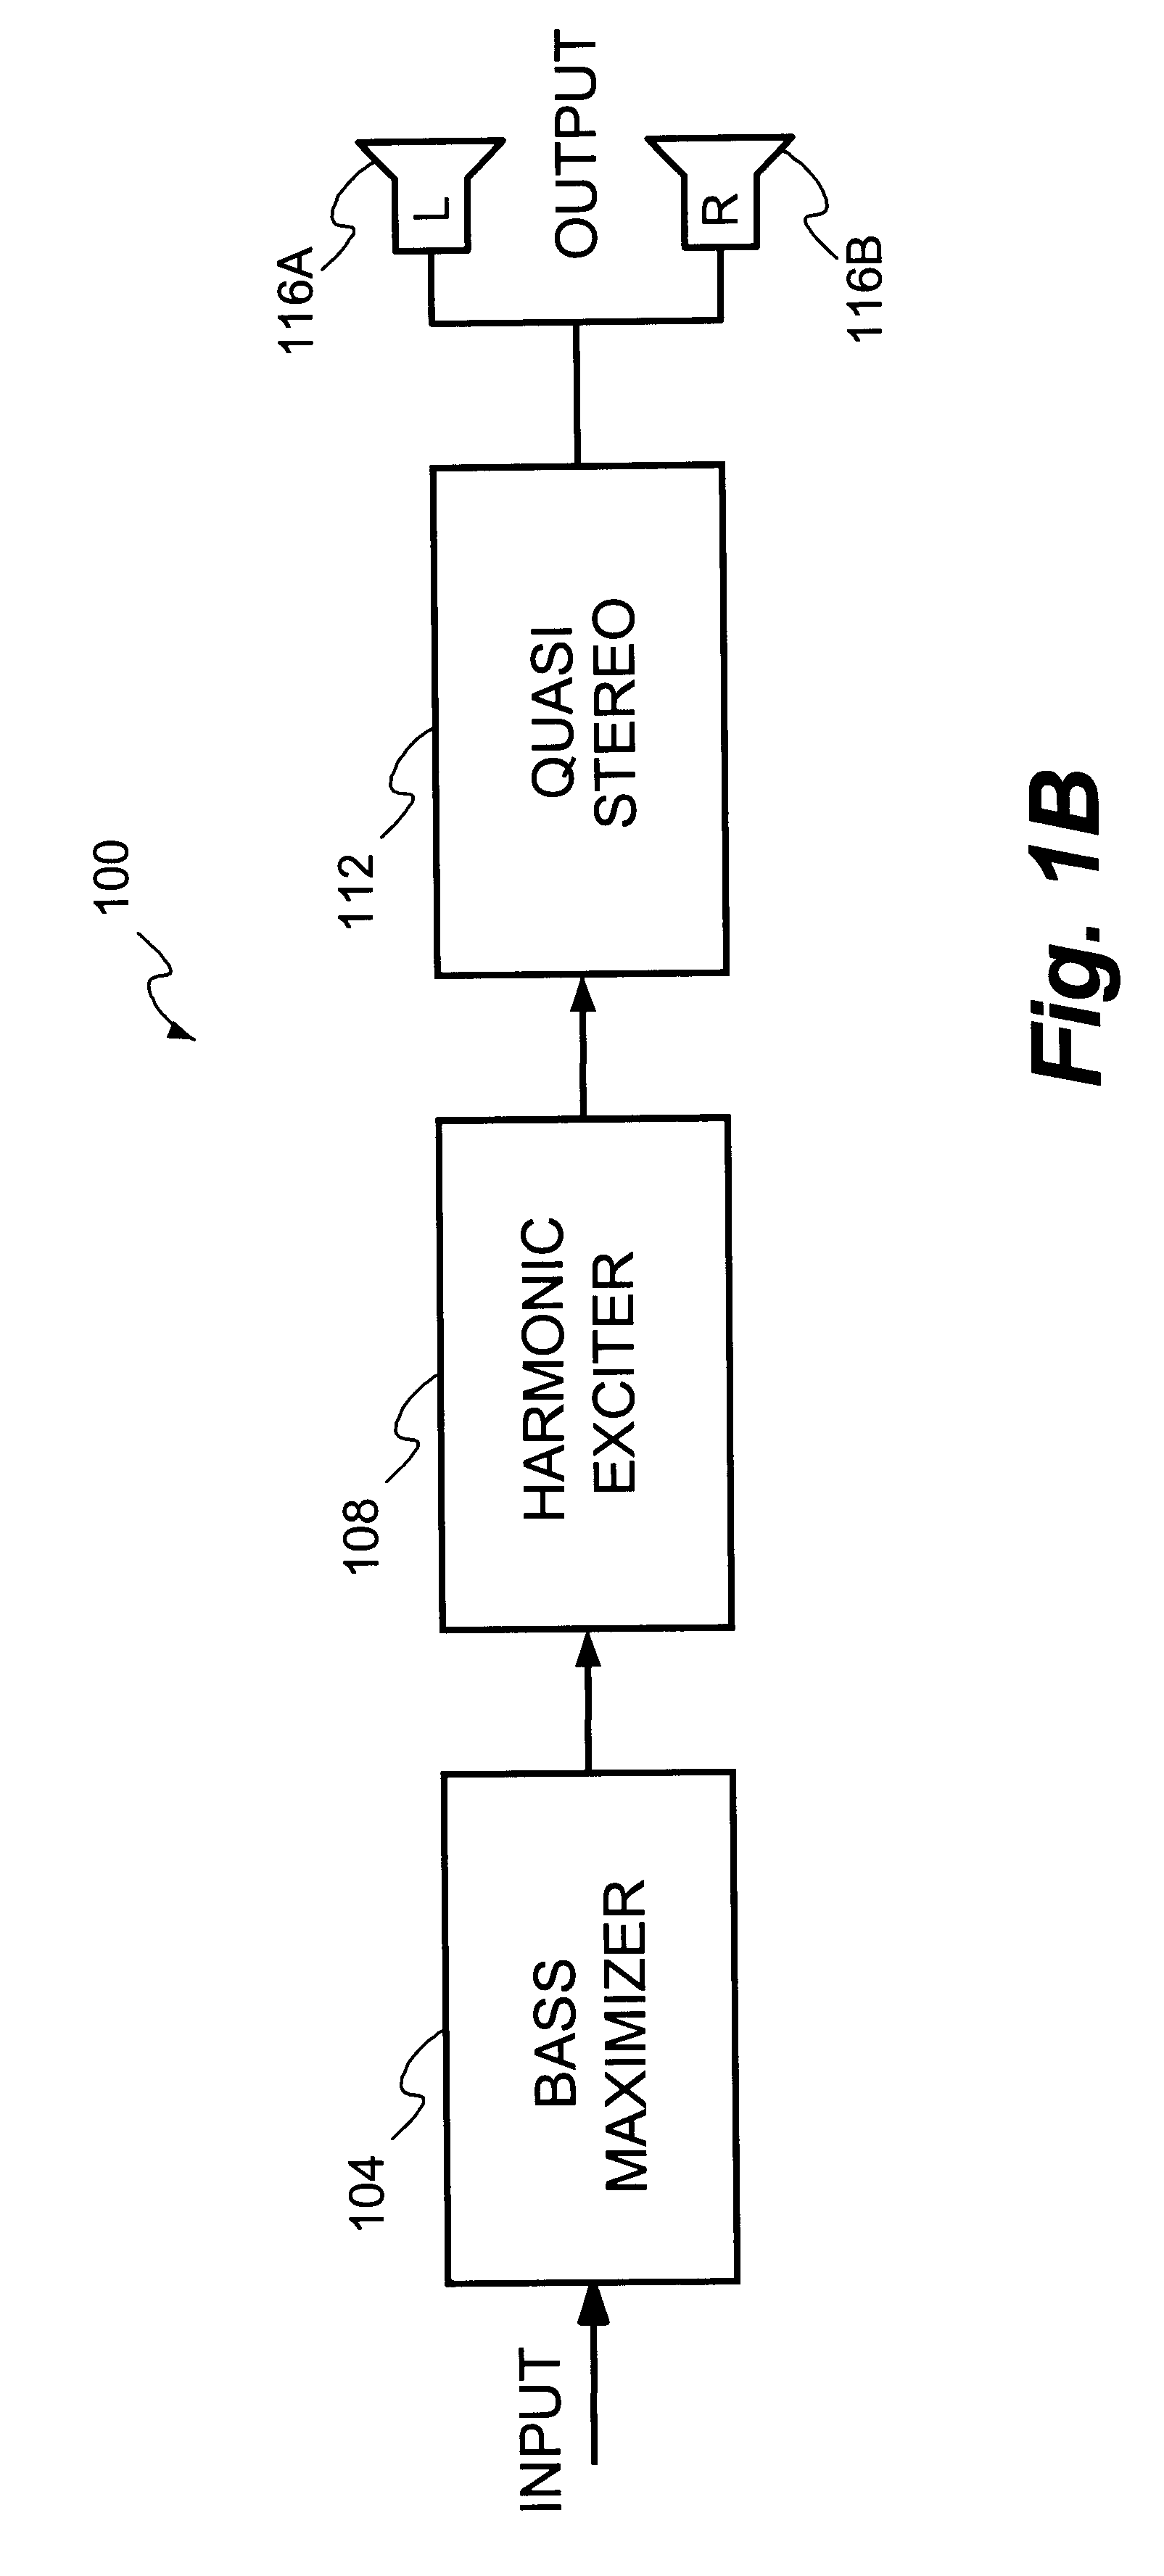 Method and system for enhancing audio signals